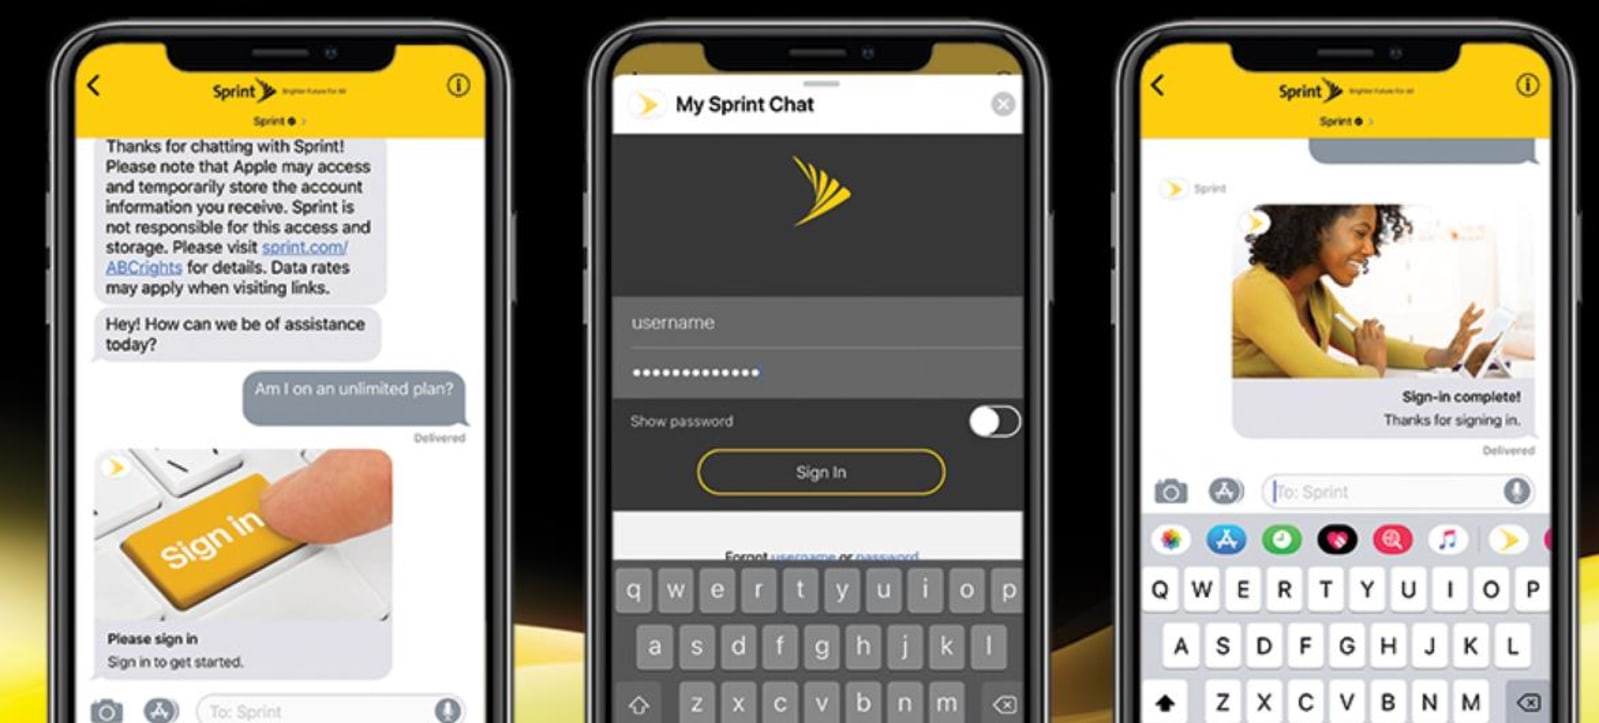 Apple Business Chat for Sprint